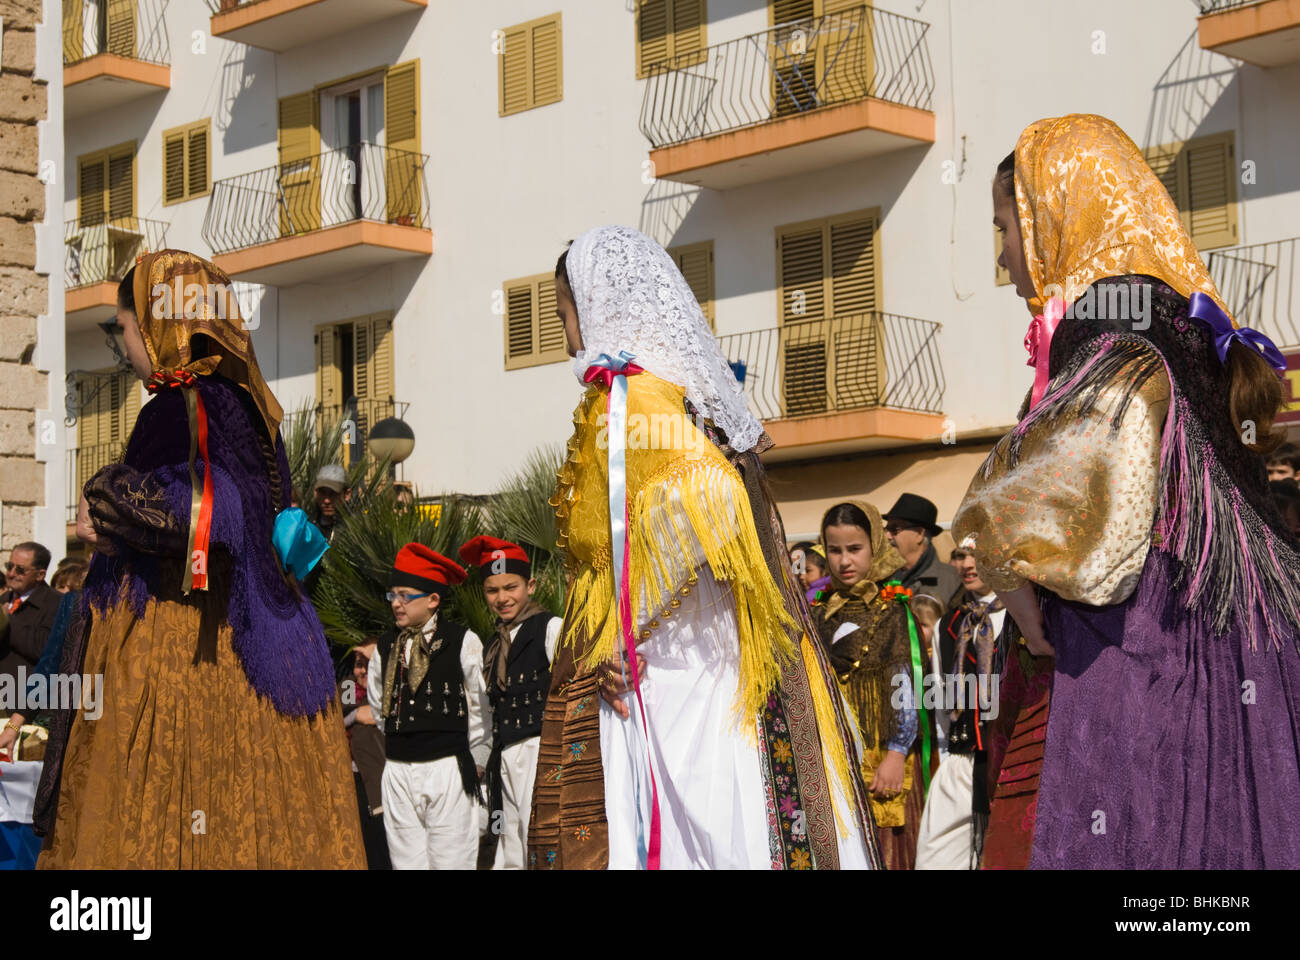 Women in traditional costume performing folklore dances, Ibiza, Spain. Stock Photo